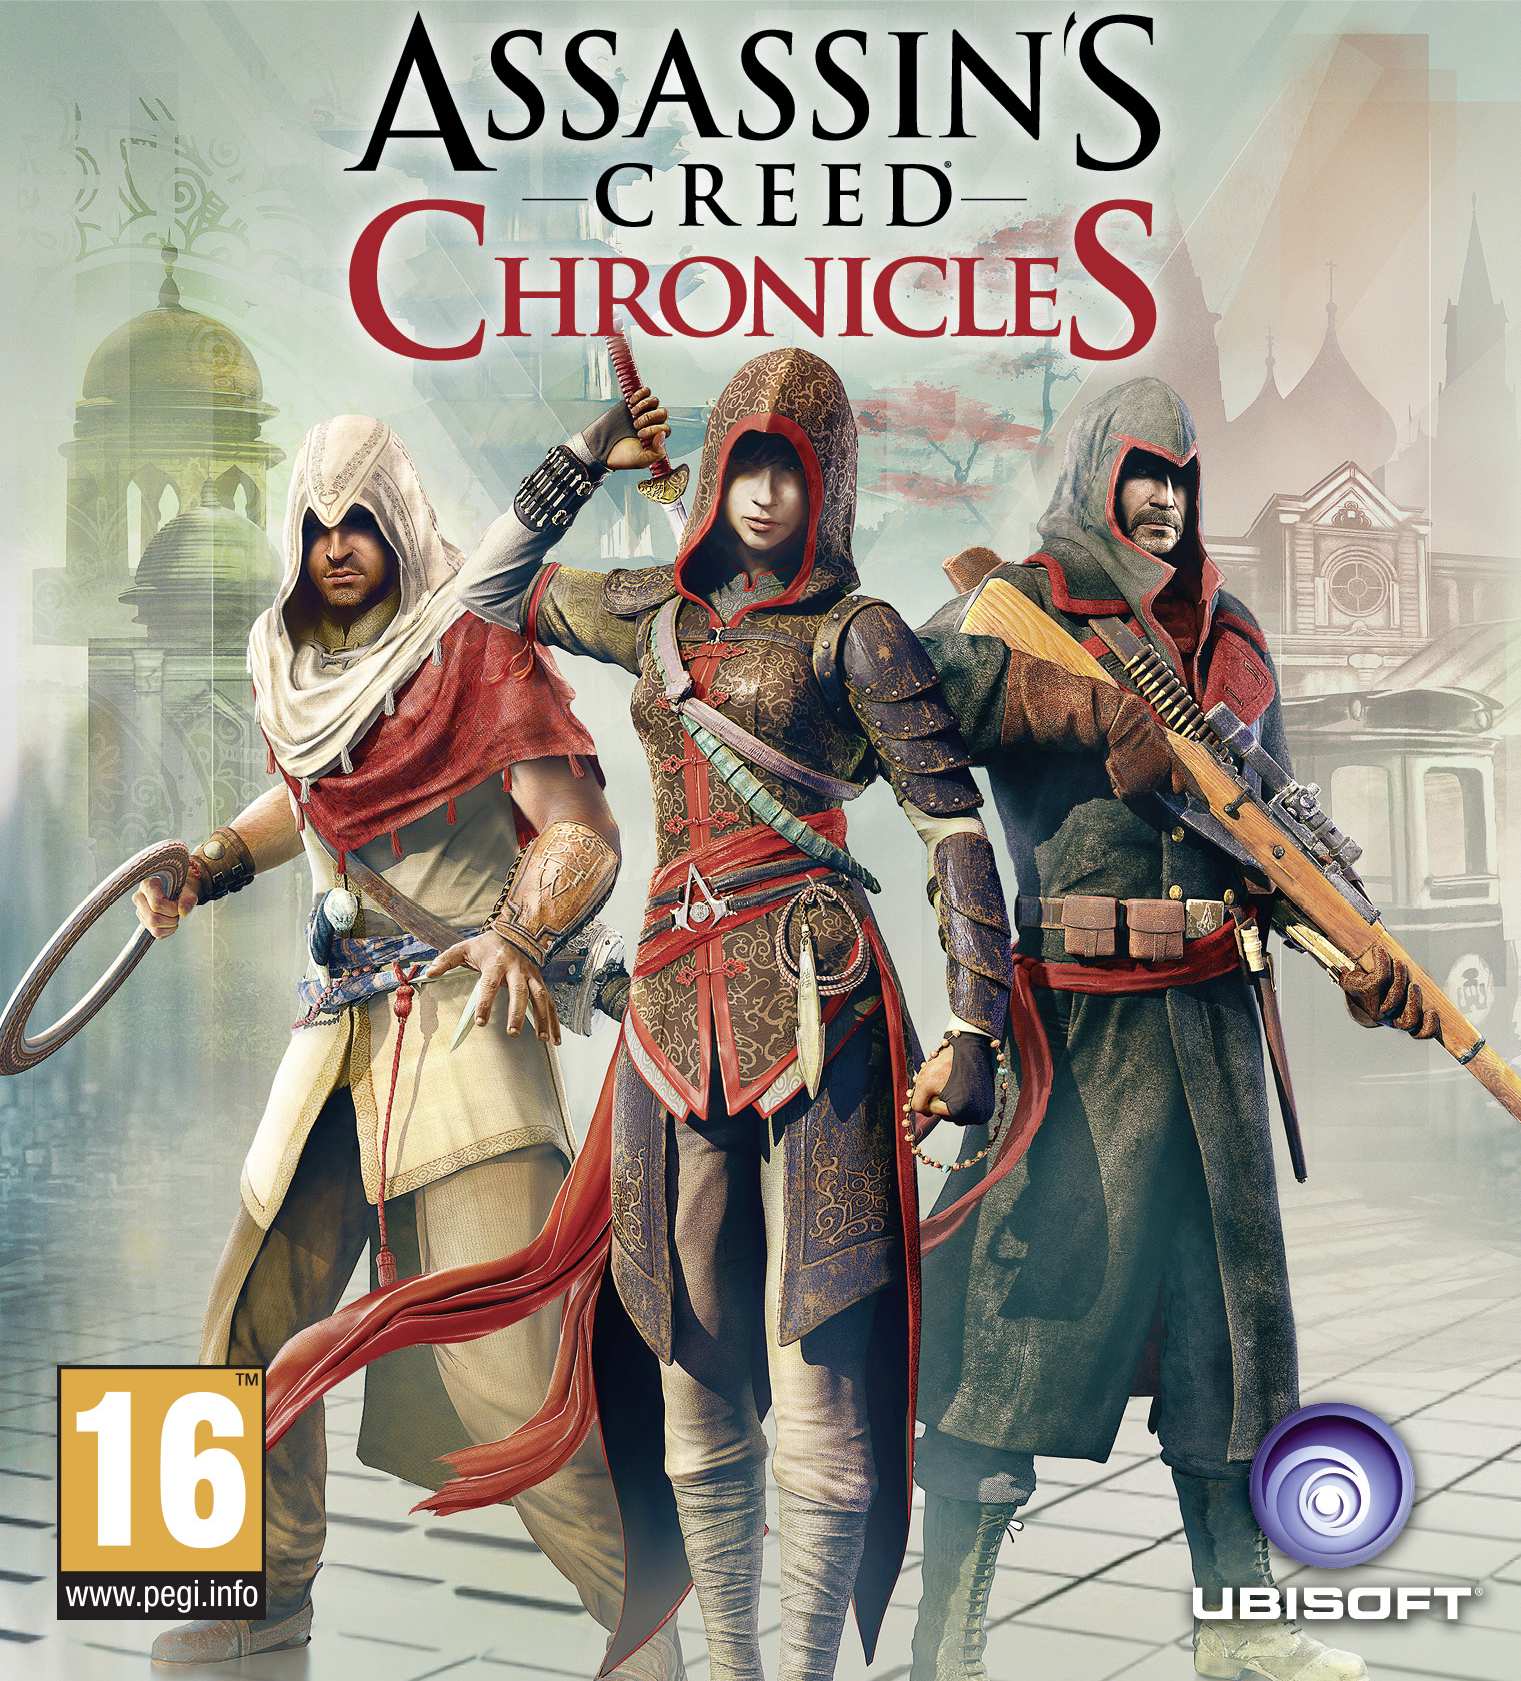 Assassin's Creed: Chronicles